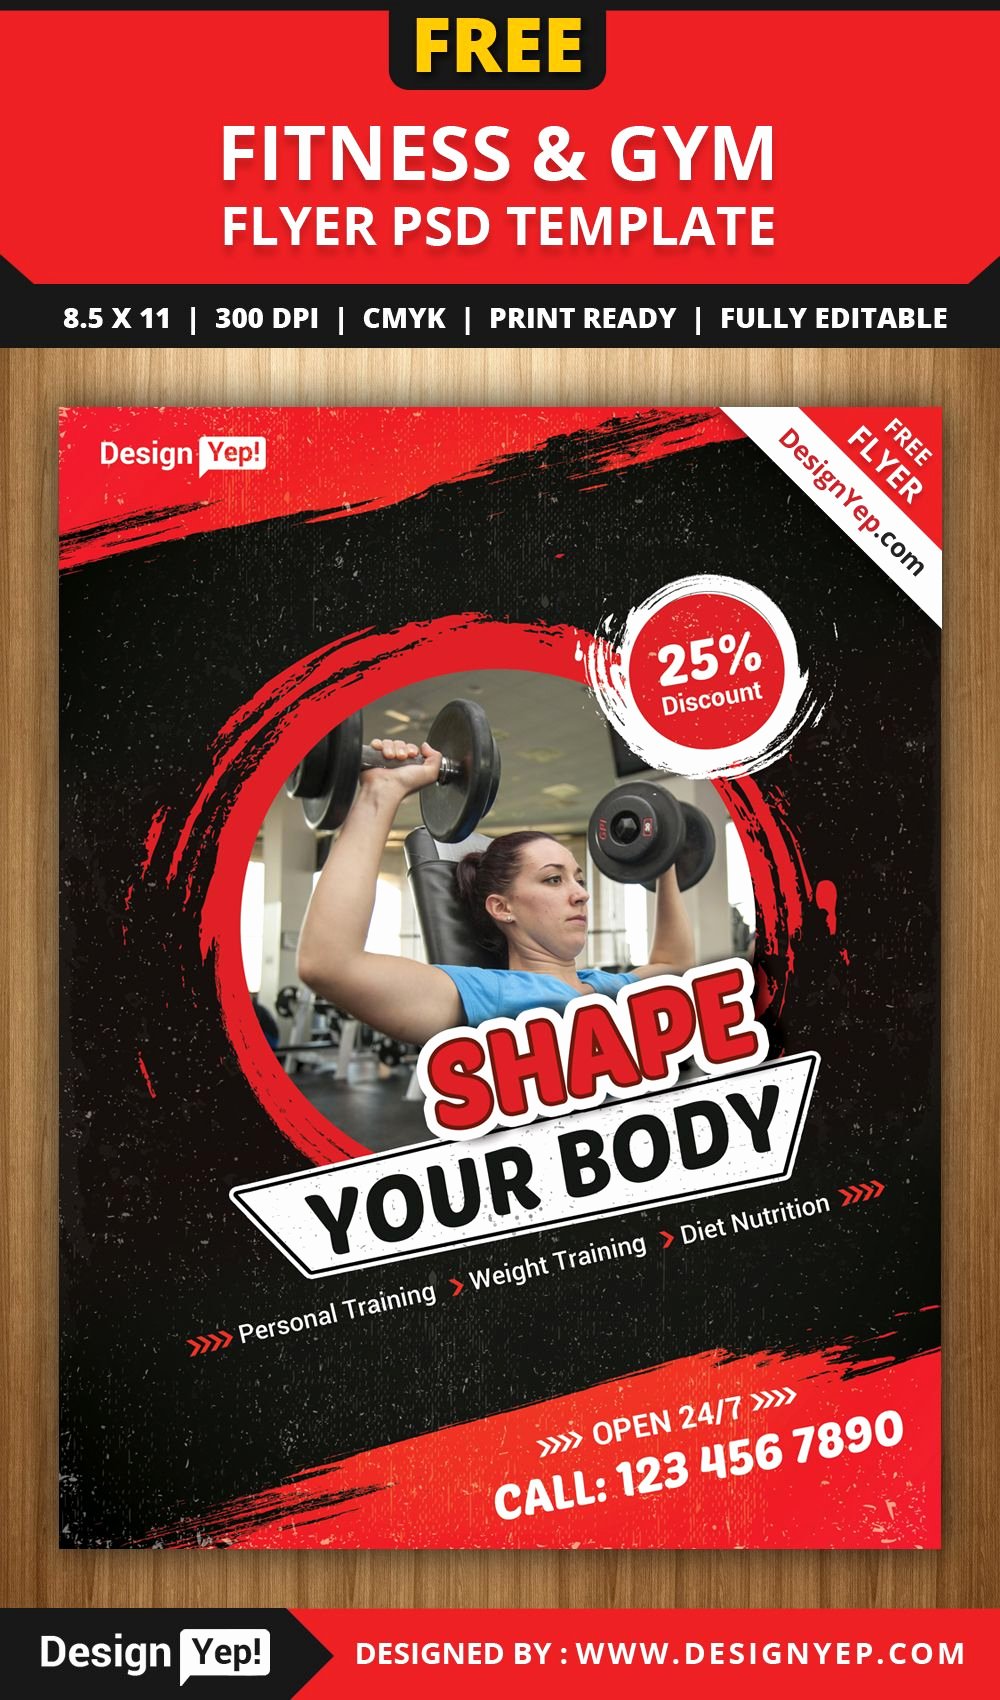 Free Fitness Flyers Templates Fresh Free Fitness Gym Flyer Psd Template 4411 Designyep Free Flyers Pinterest